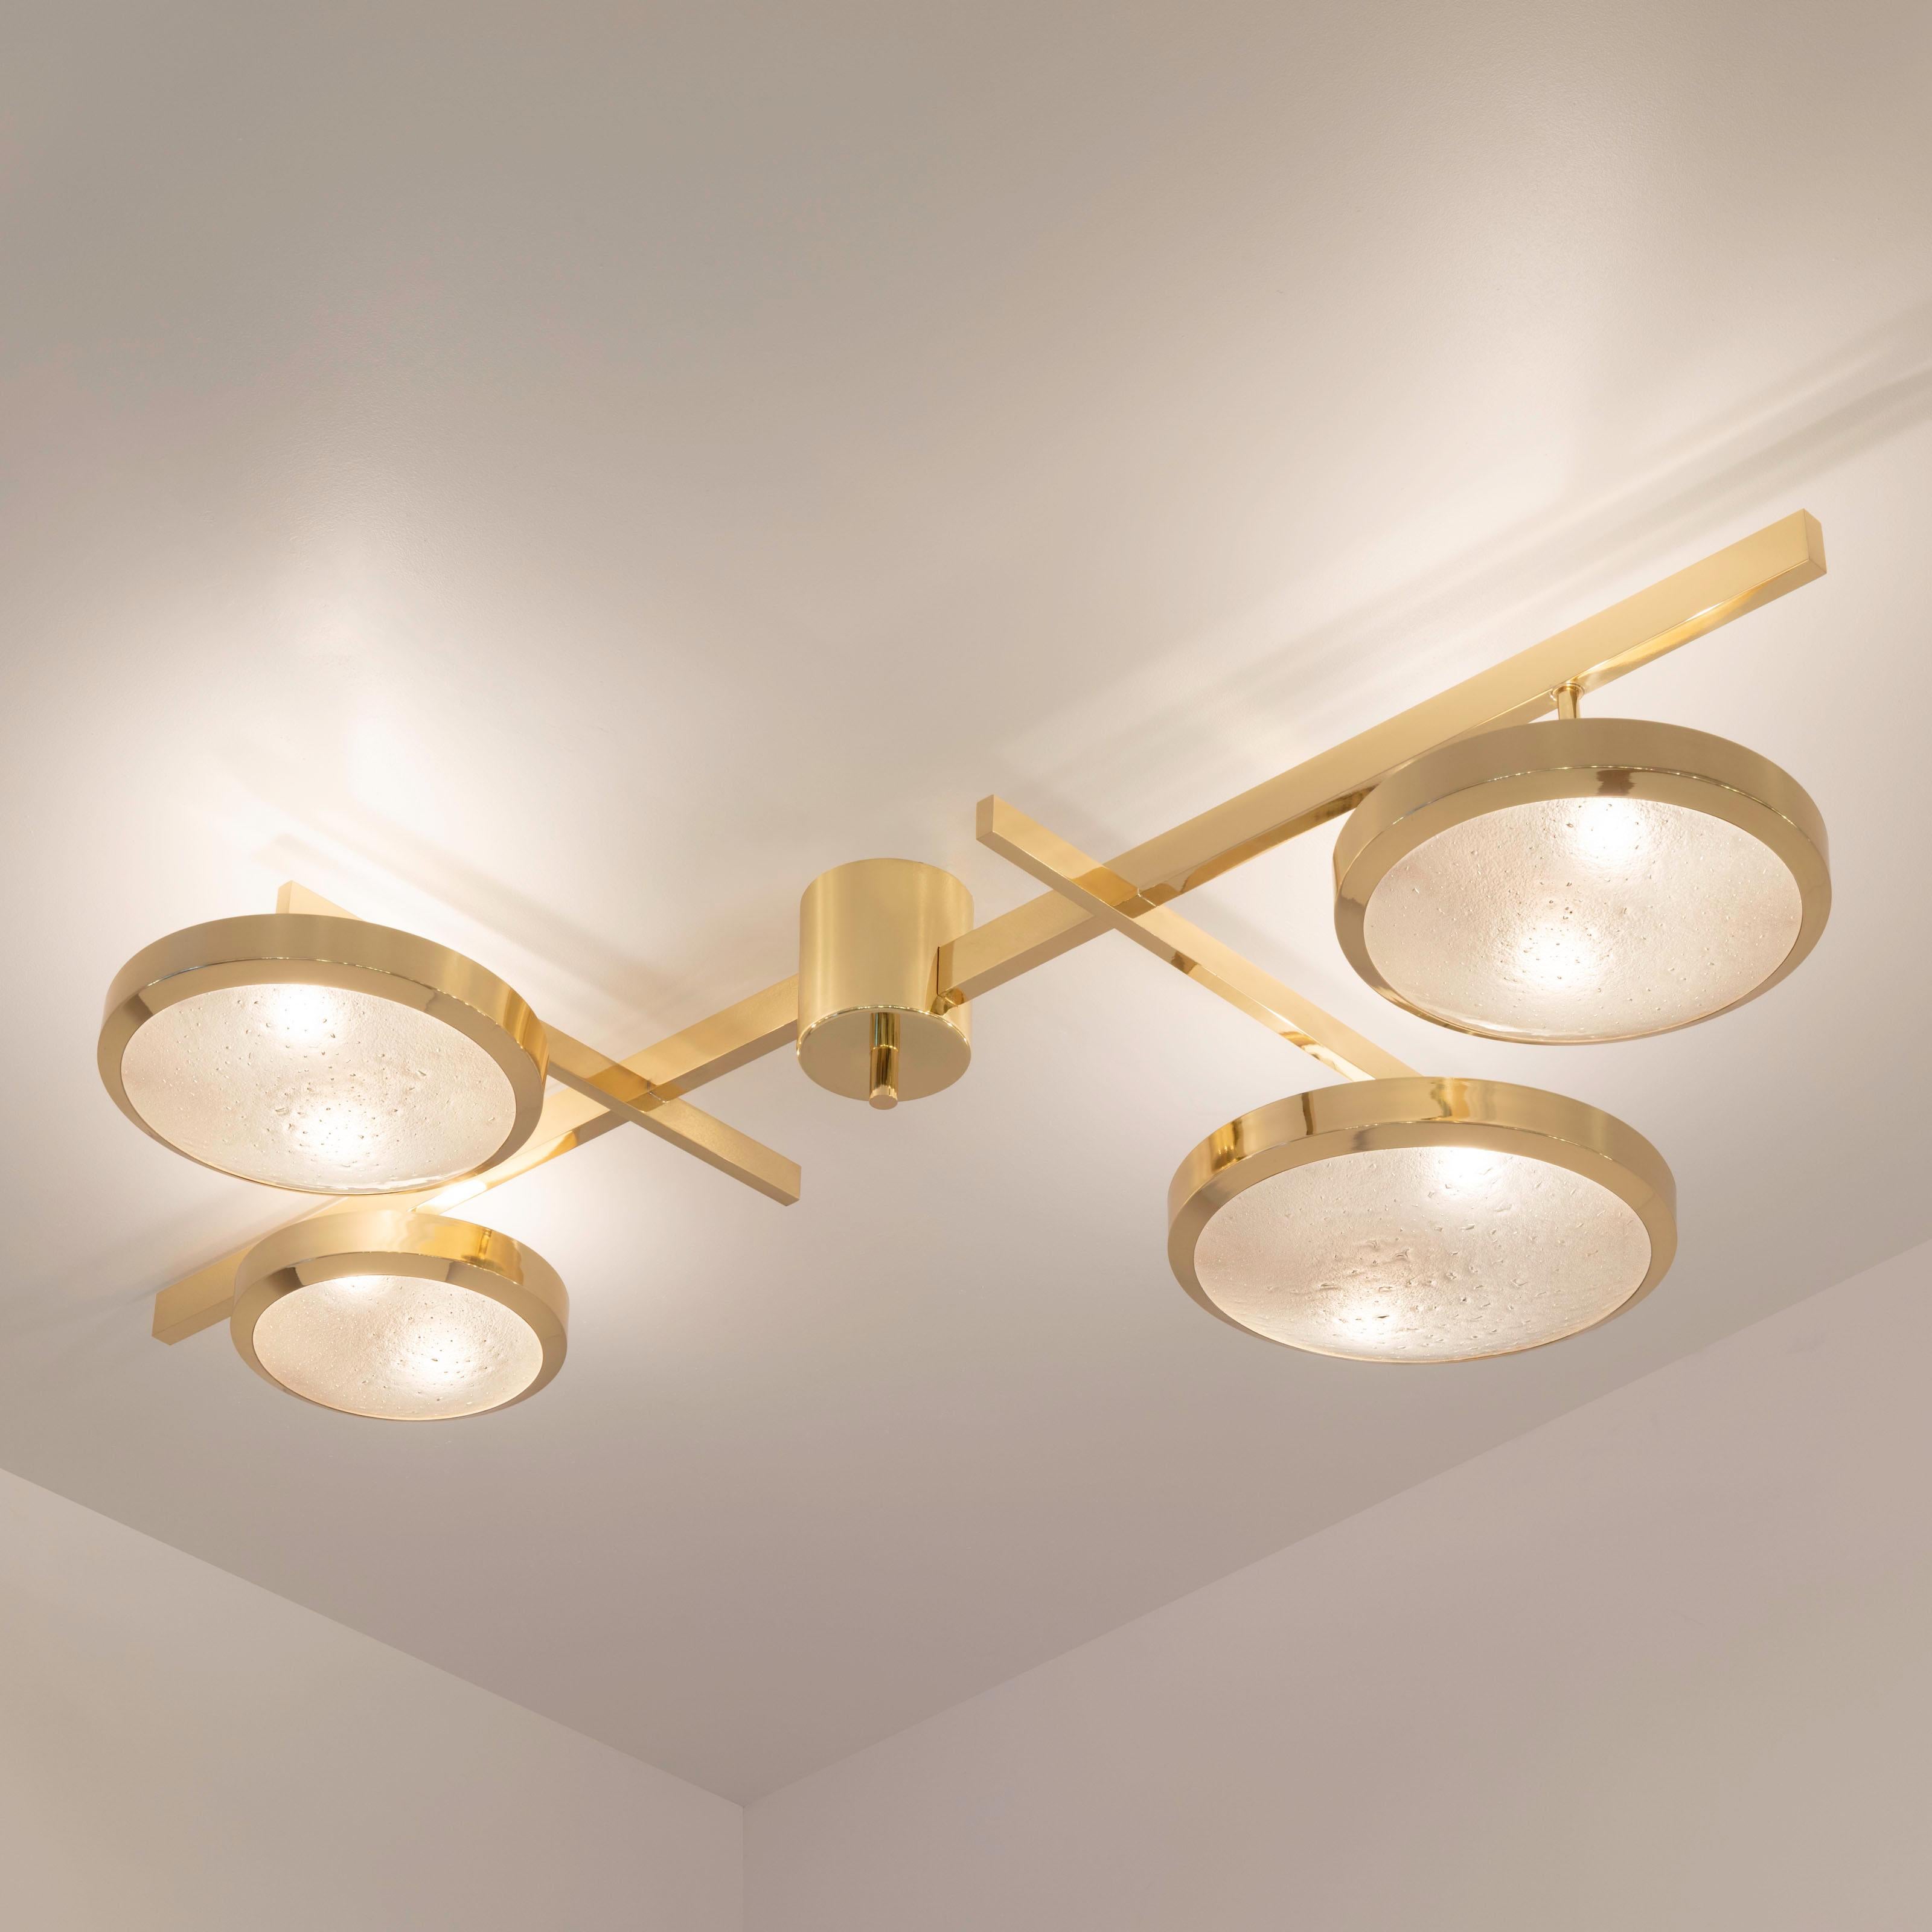 Tetrix Ceiling Light by Gaspare Asaro - Satin Brass Finish In New Condition For Sale In New York, NY